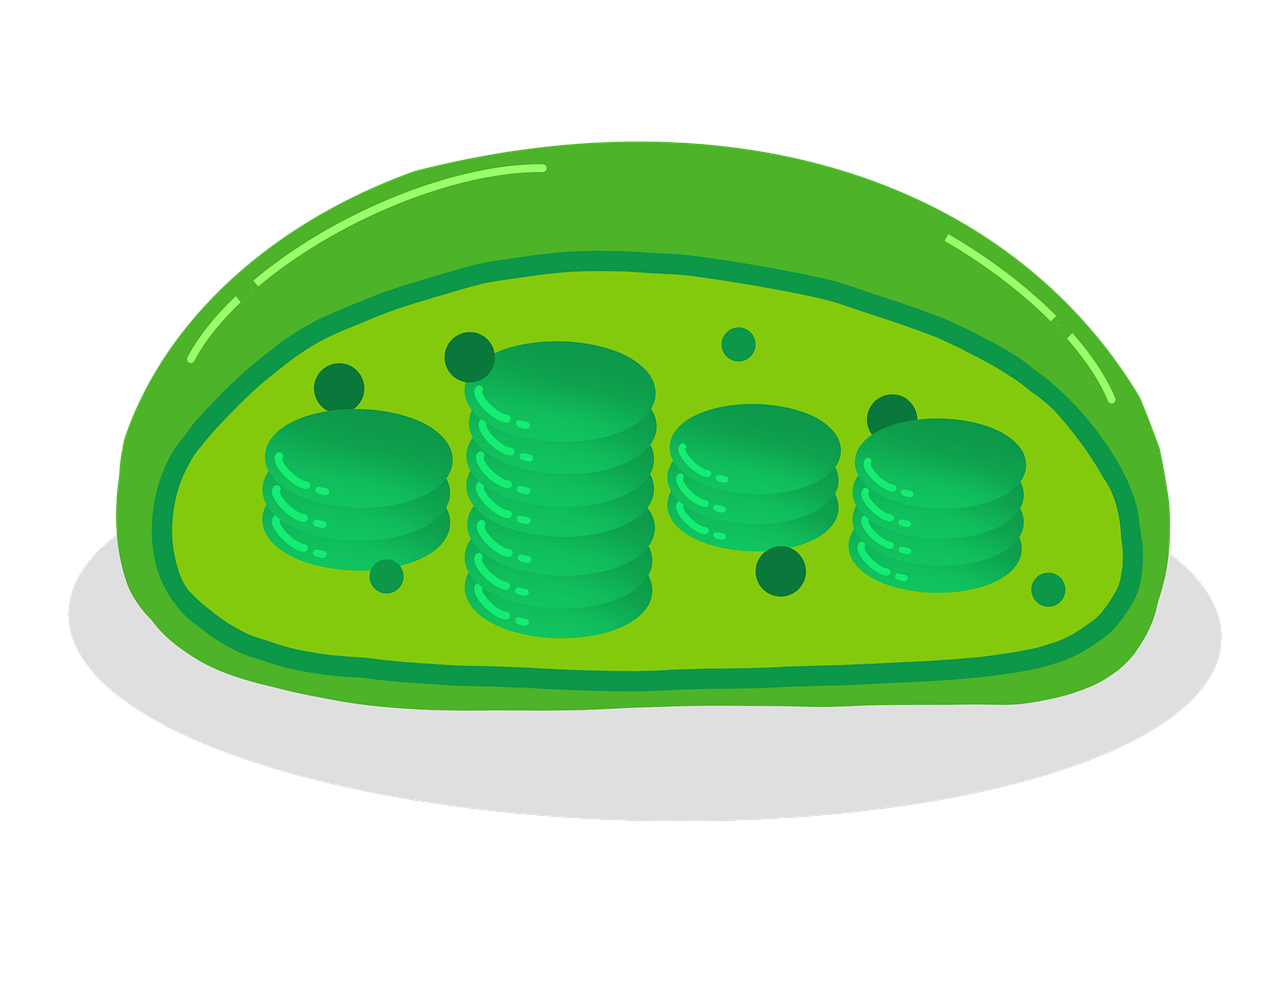 a green cell with stacks of coins on it, an illustration of, inspired by Masamitsu Ōta, art nouveau, pickle rick, microscopic photo, wikihow illustration, egg